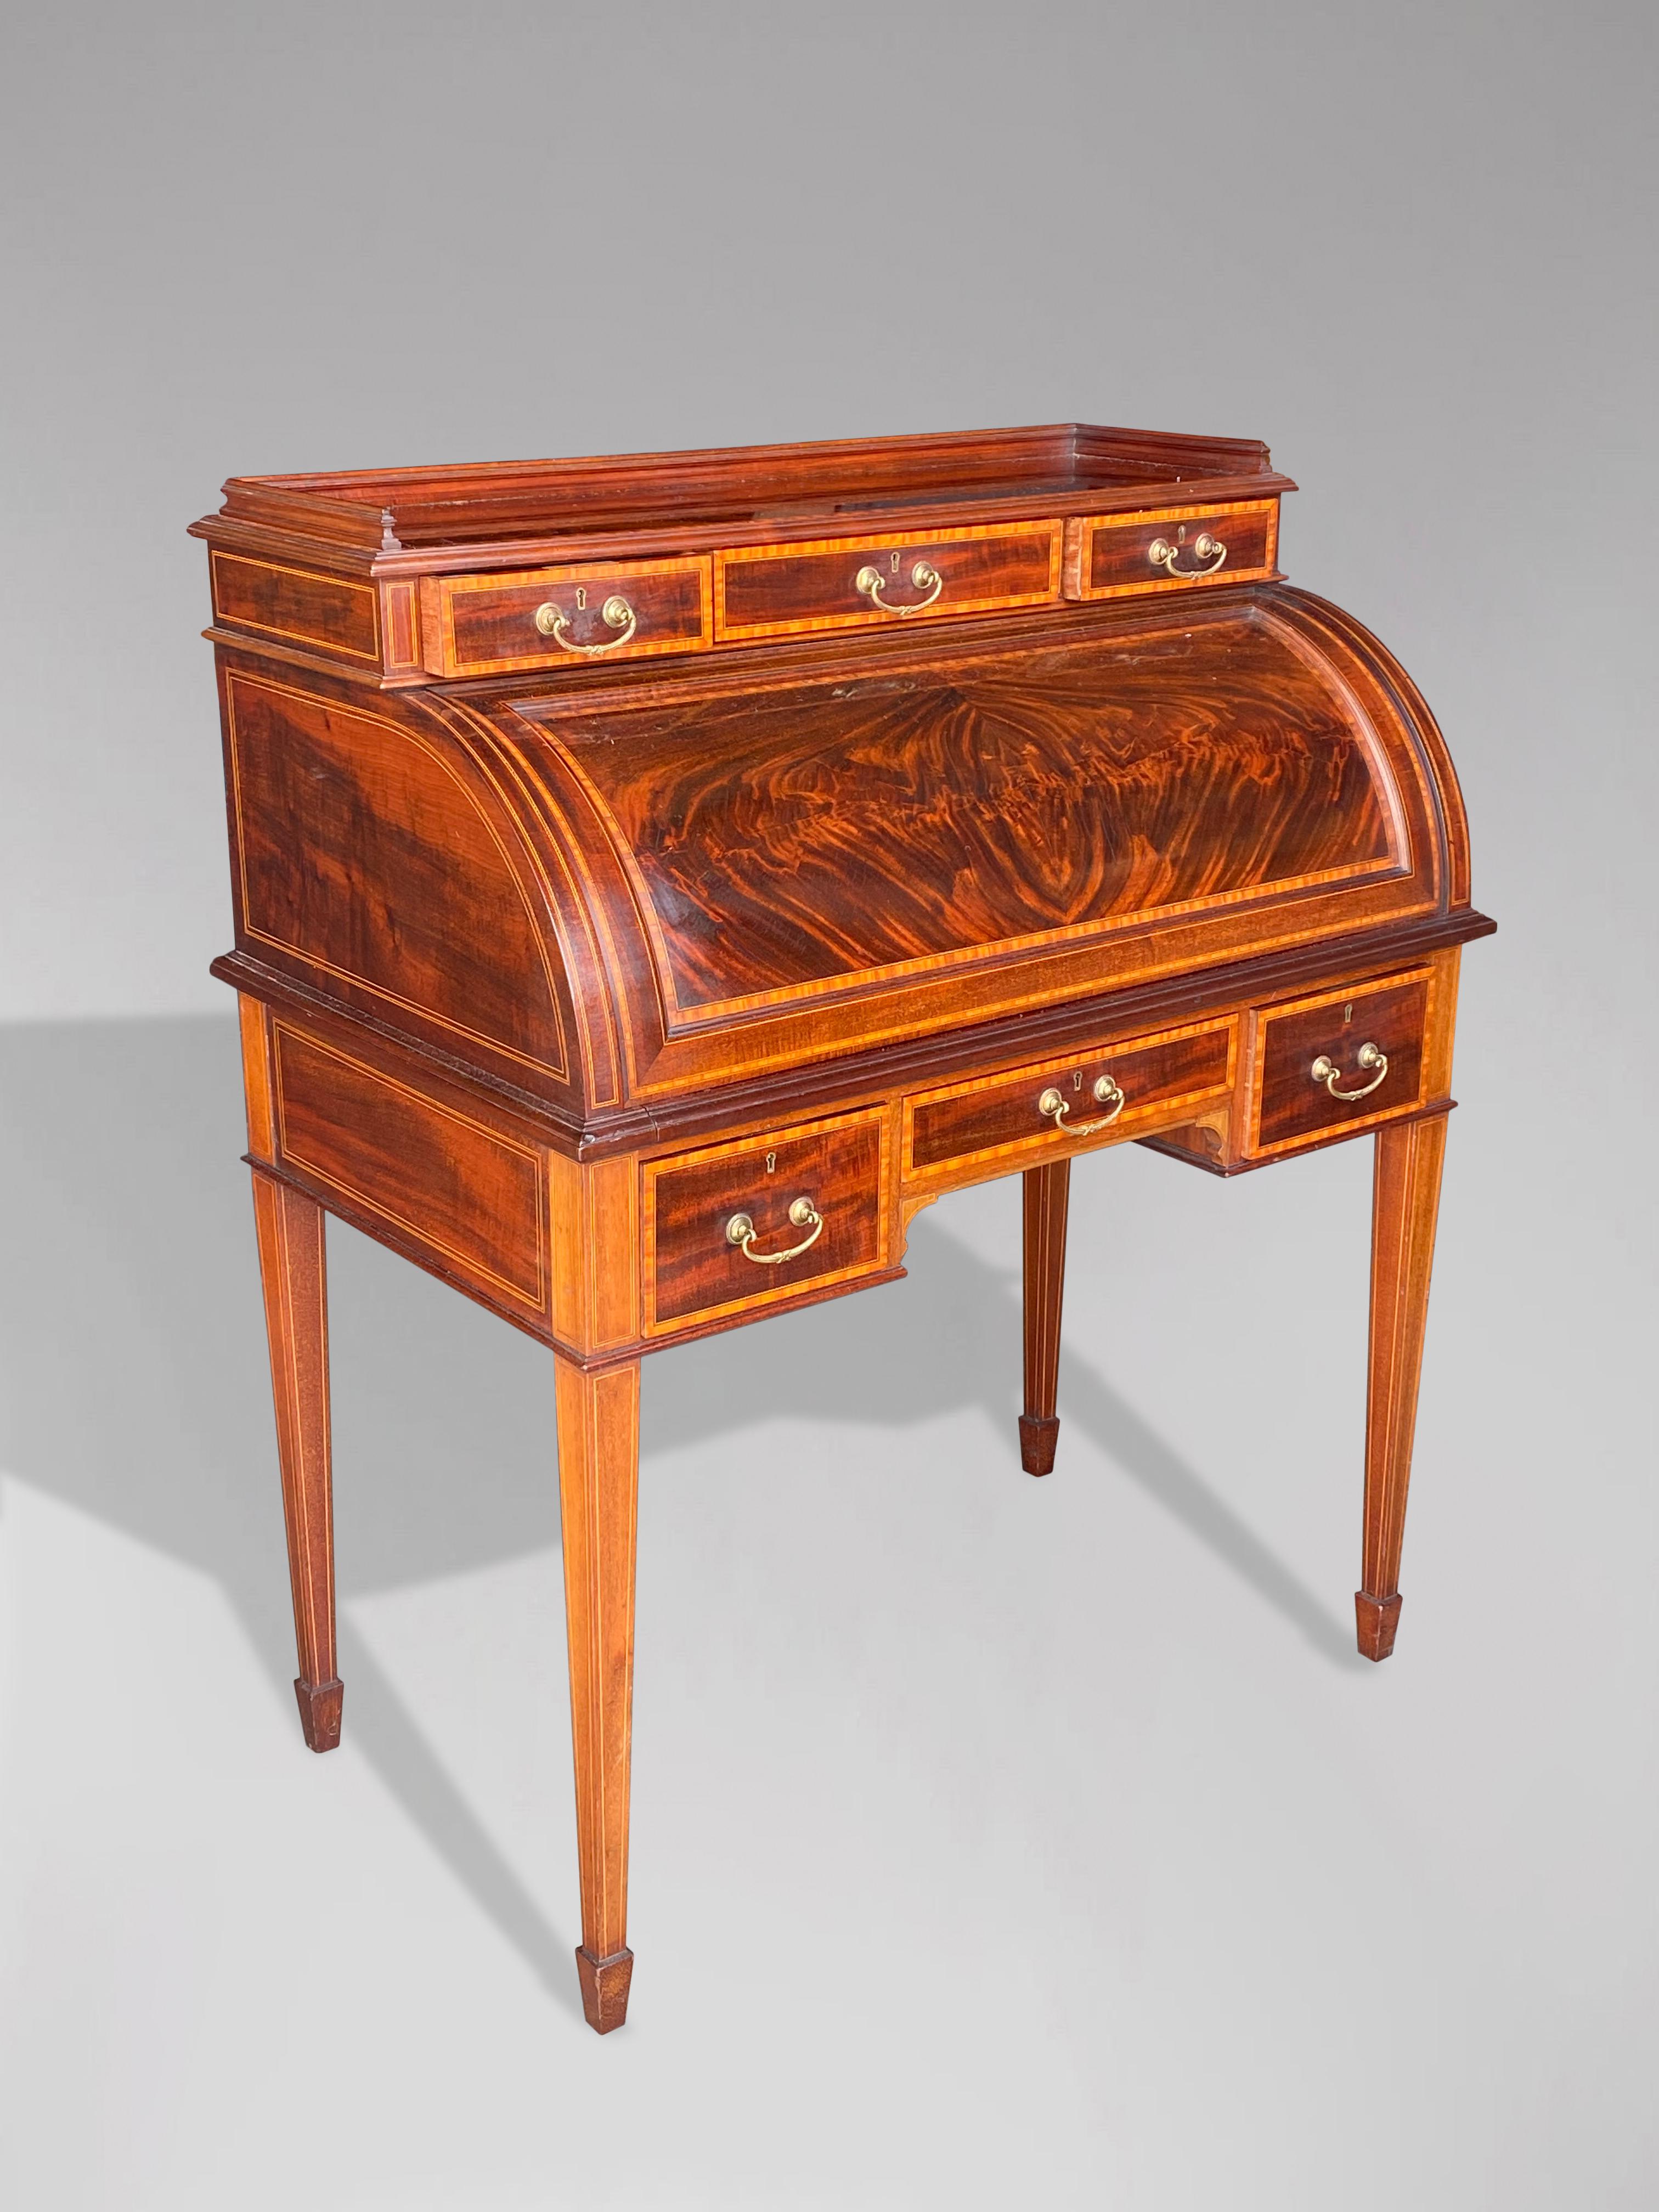 A stunning quality, early 20th century, Edwardian period mahogany free standing roll top desk from the renown London makers MAPLE & CO. Inlaid throughout with satinwood banding, boxwood and ebony stringing with good quality mahogany linings. The